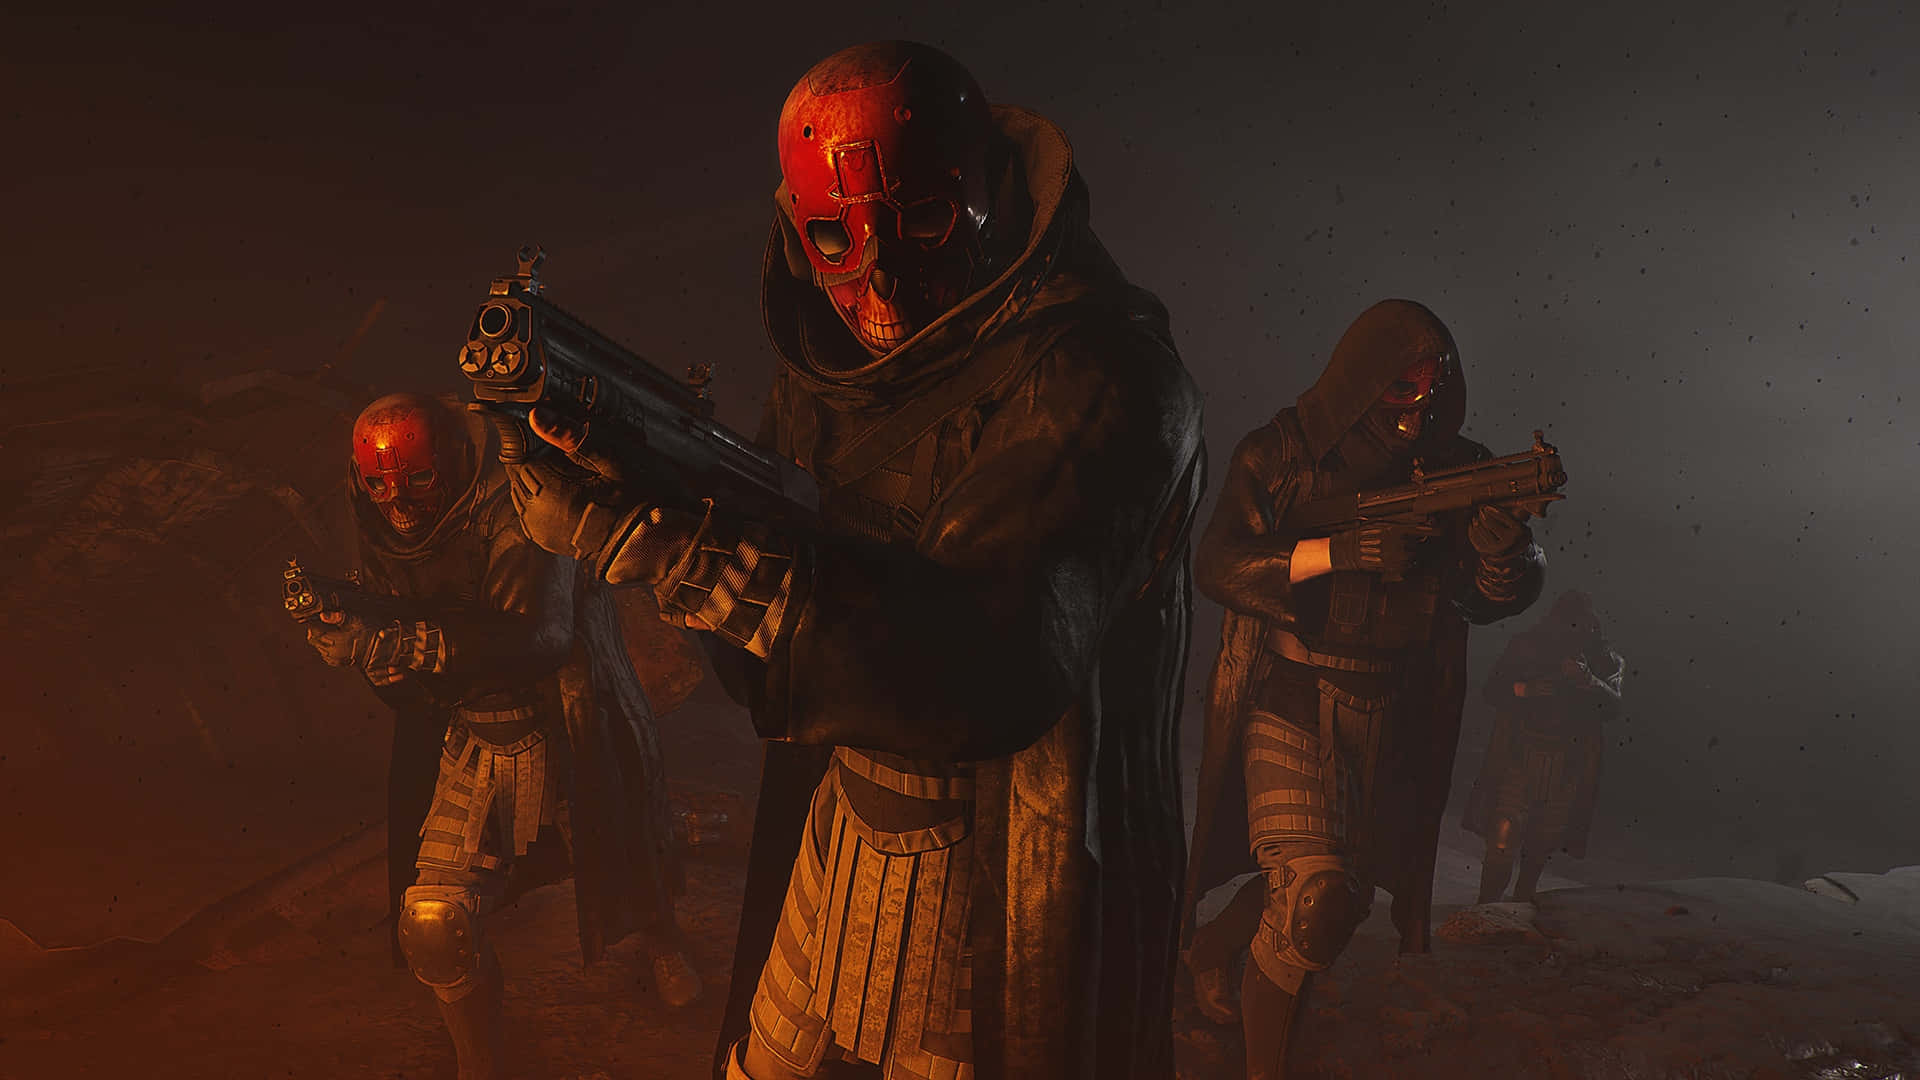 A Group Of People With Guns In The Dark